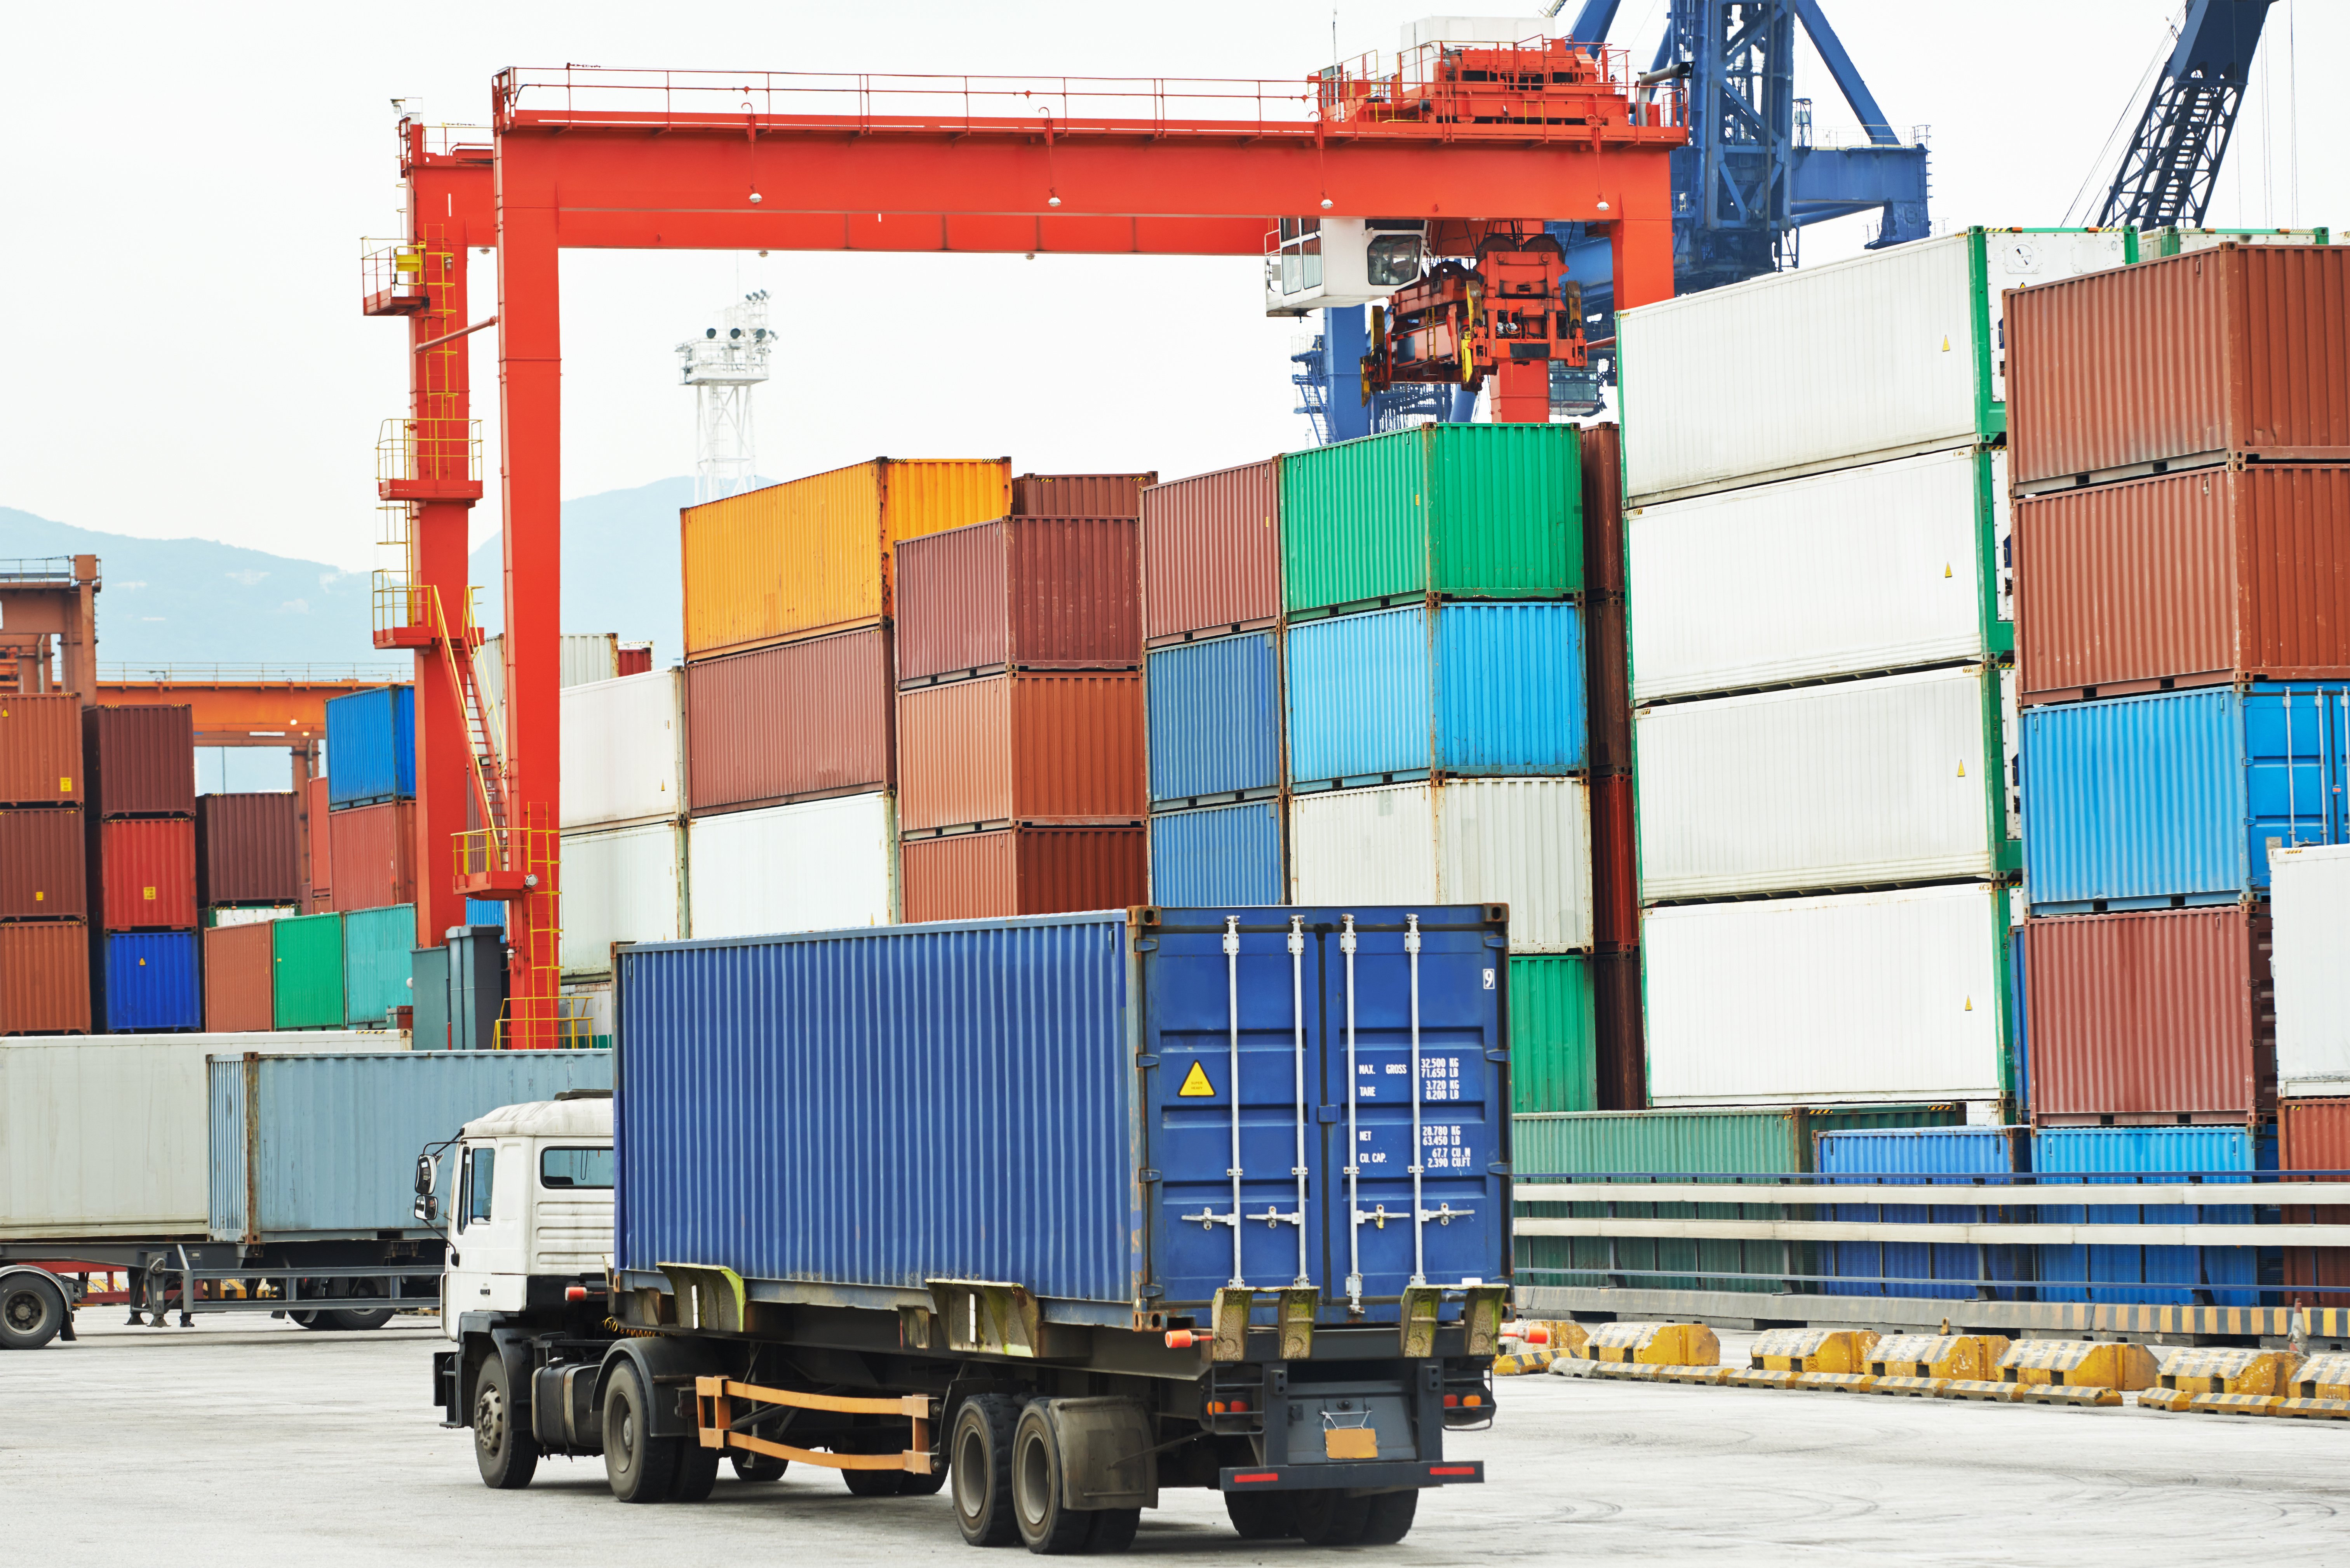 How to Ship Intermodal Without Damage